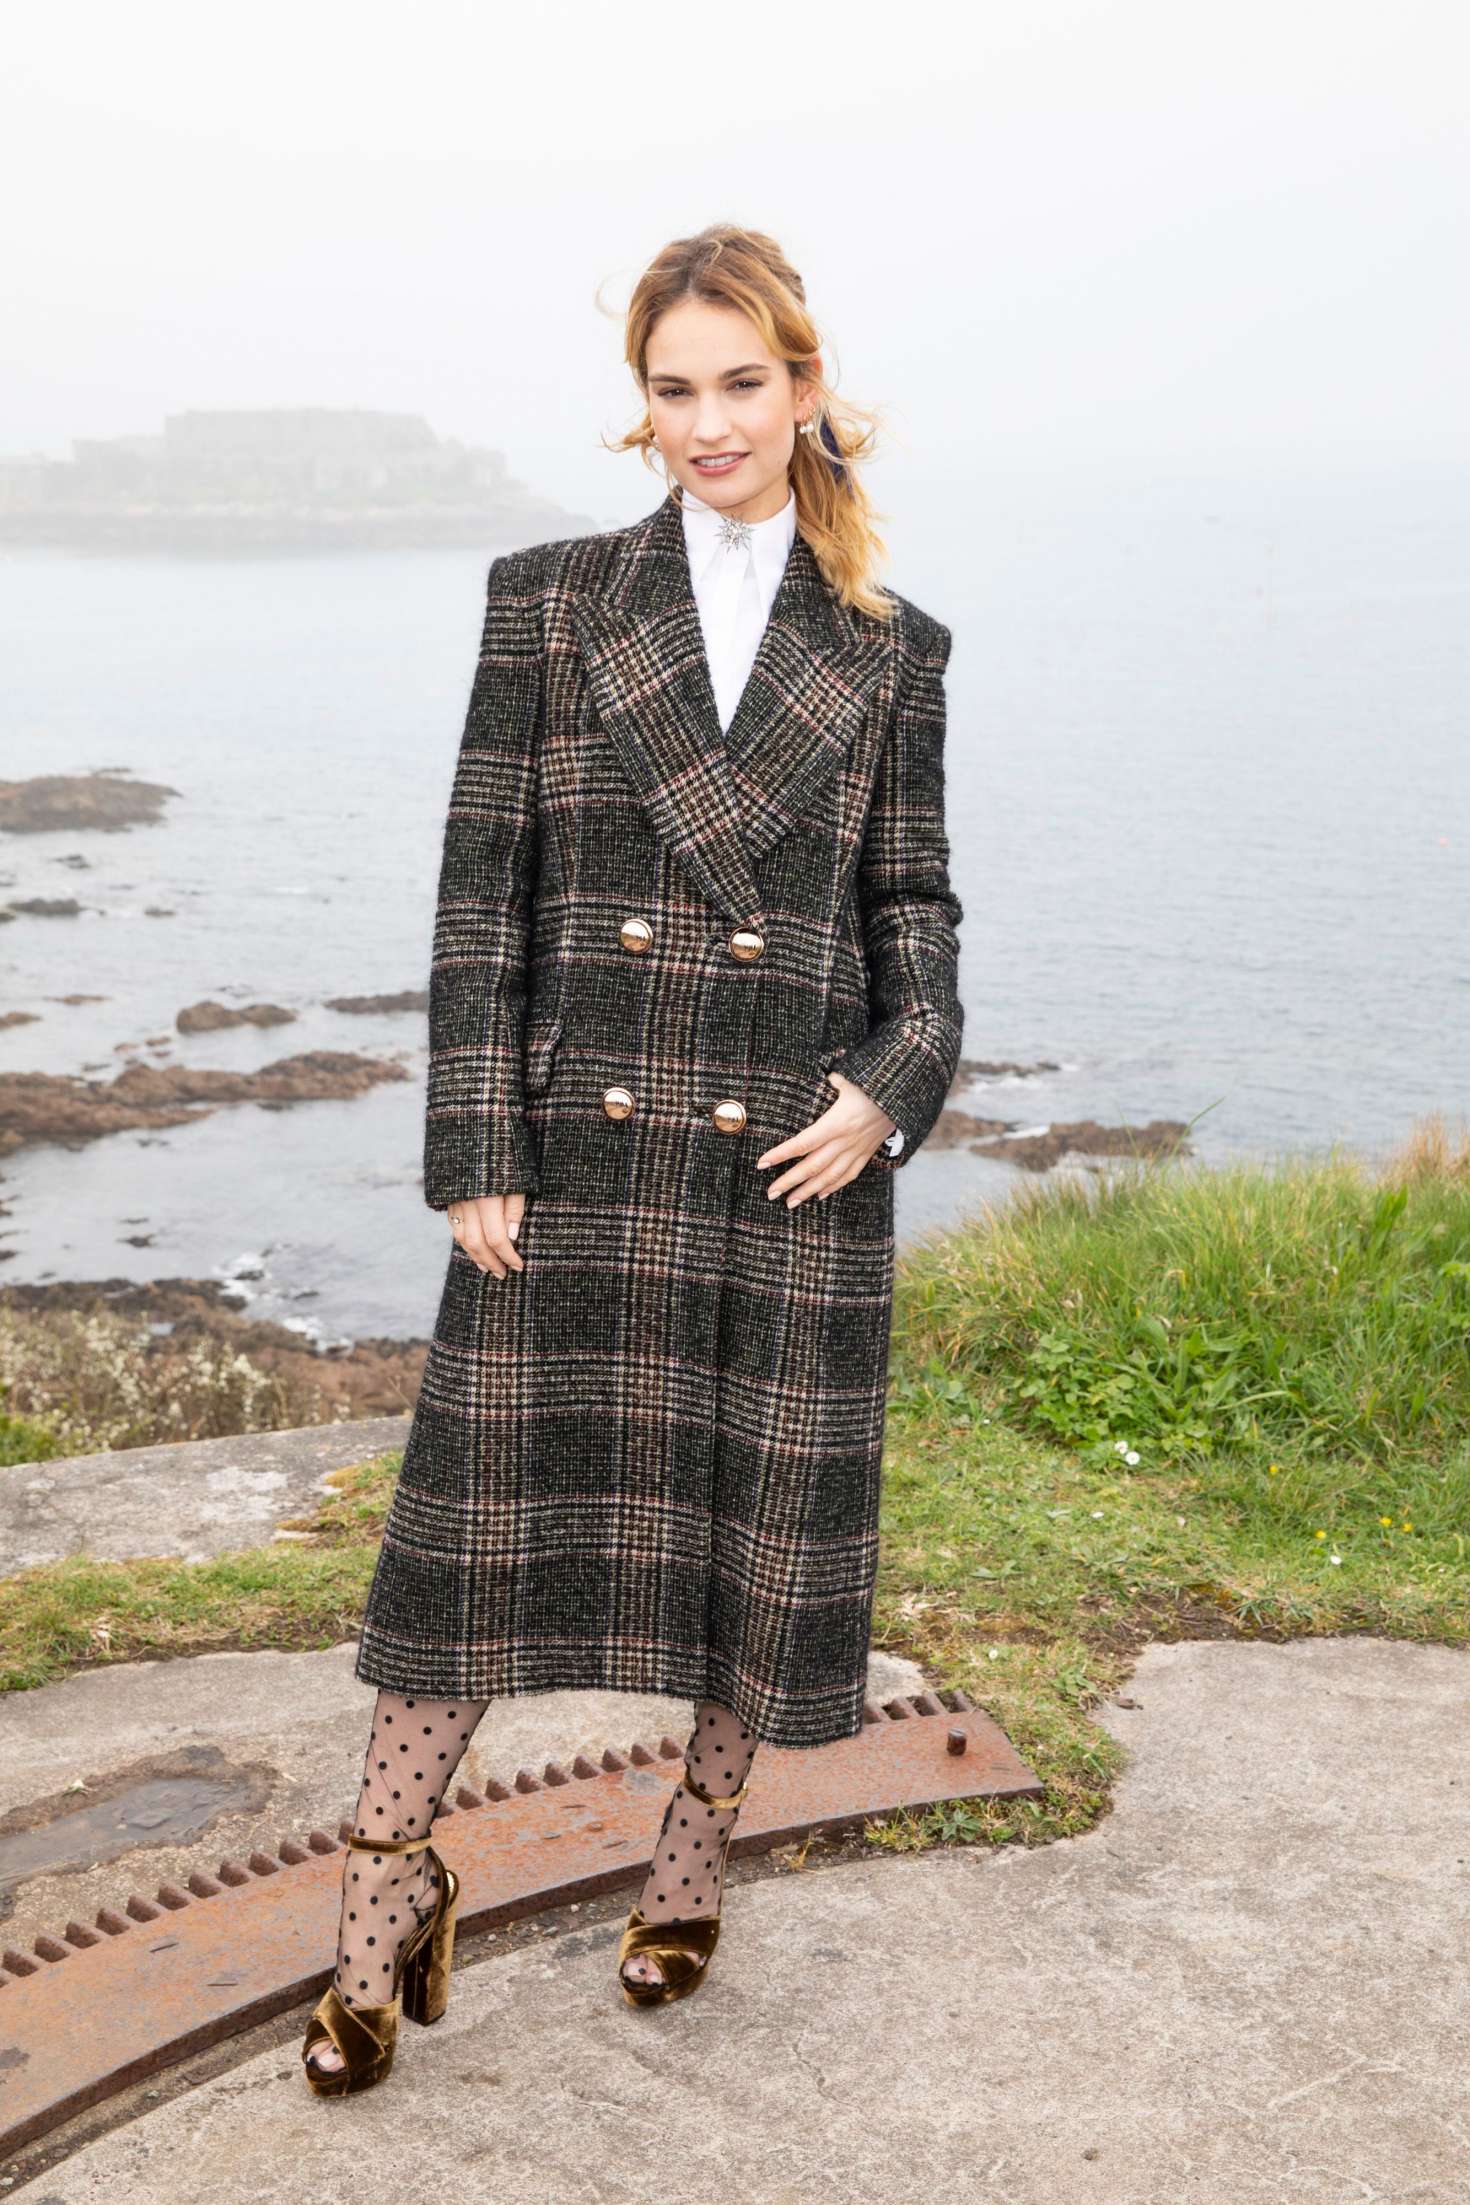 Lily James - 'The Guernsey Literary and Potato Peel Pie Society' Photocall in Guernsey